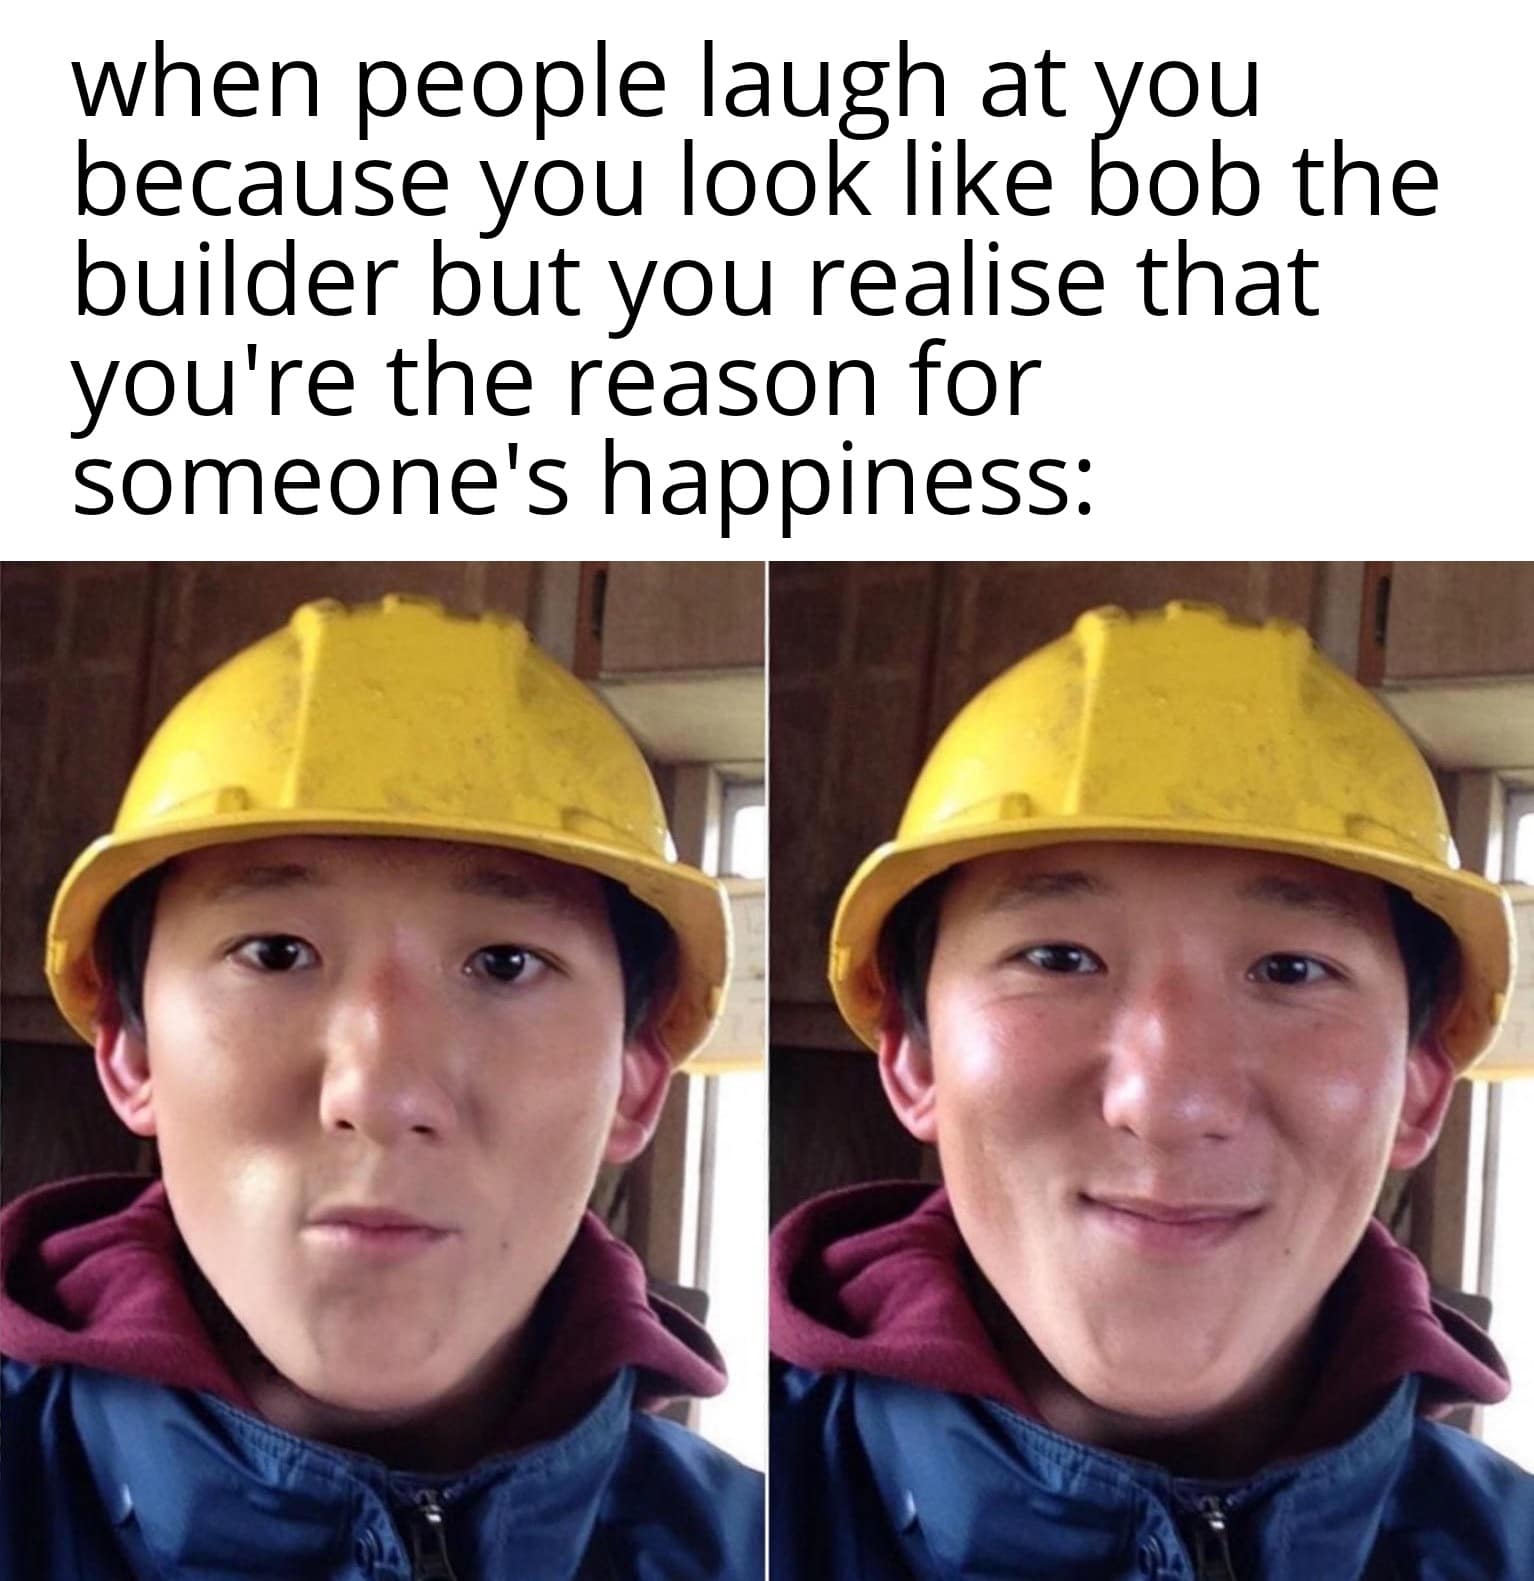 Wholesome memes, Bob, BOB, Builder Wholesome Memes Wholesome memes, Bob, BOB, Builder text: when people laugh at you because you look like bob the builder but you realise that you're the reason for someone's happiness: 